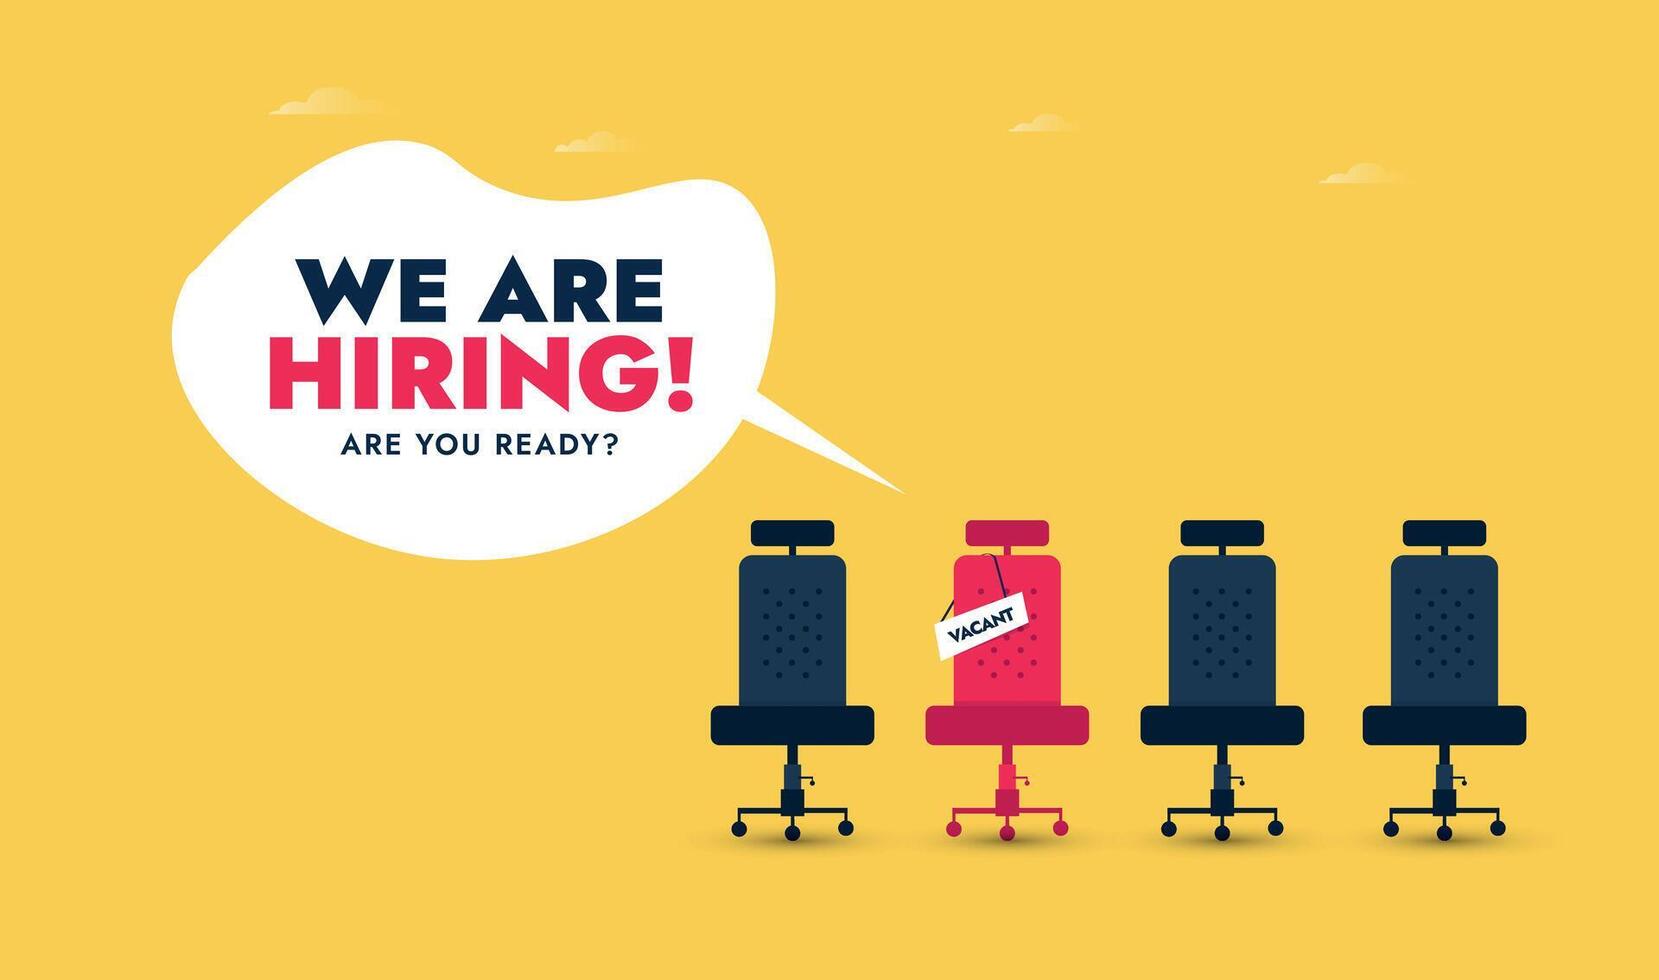 We are hiring. We're hiring cover banner with empty office chairs ready to be equipped having a vacant sign. Job recruitment cover banner in yellow colour. Recruitment process concept vector